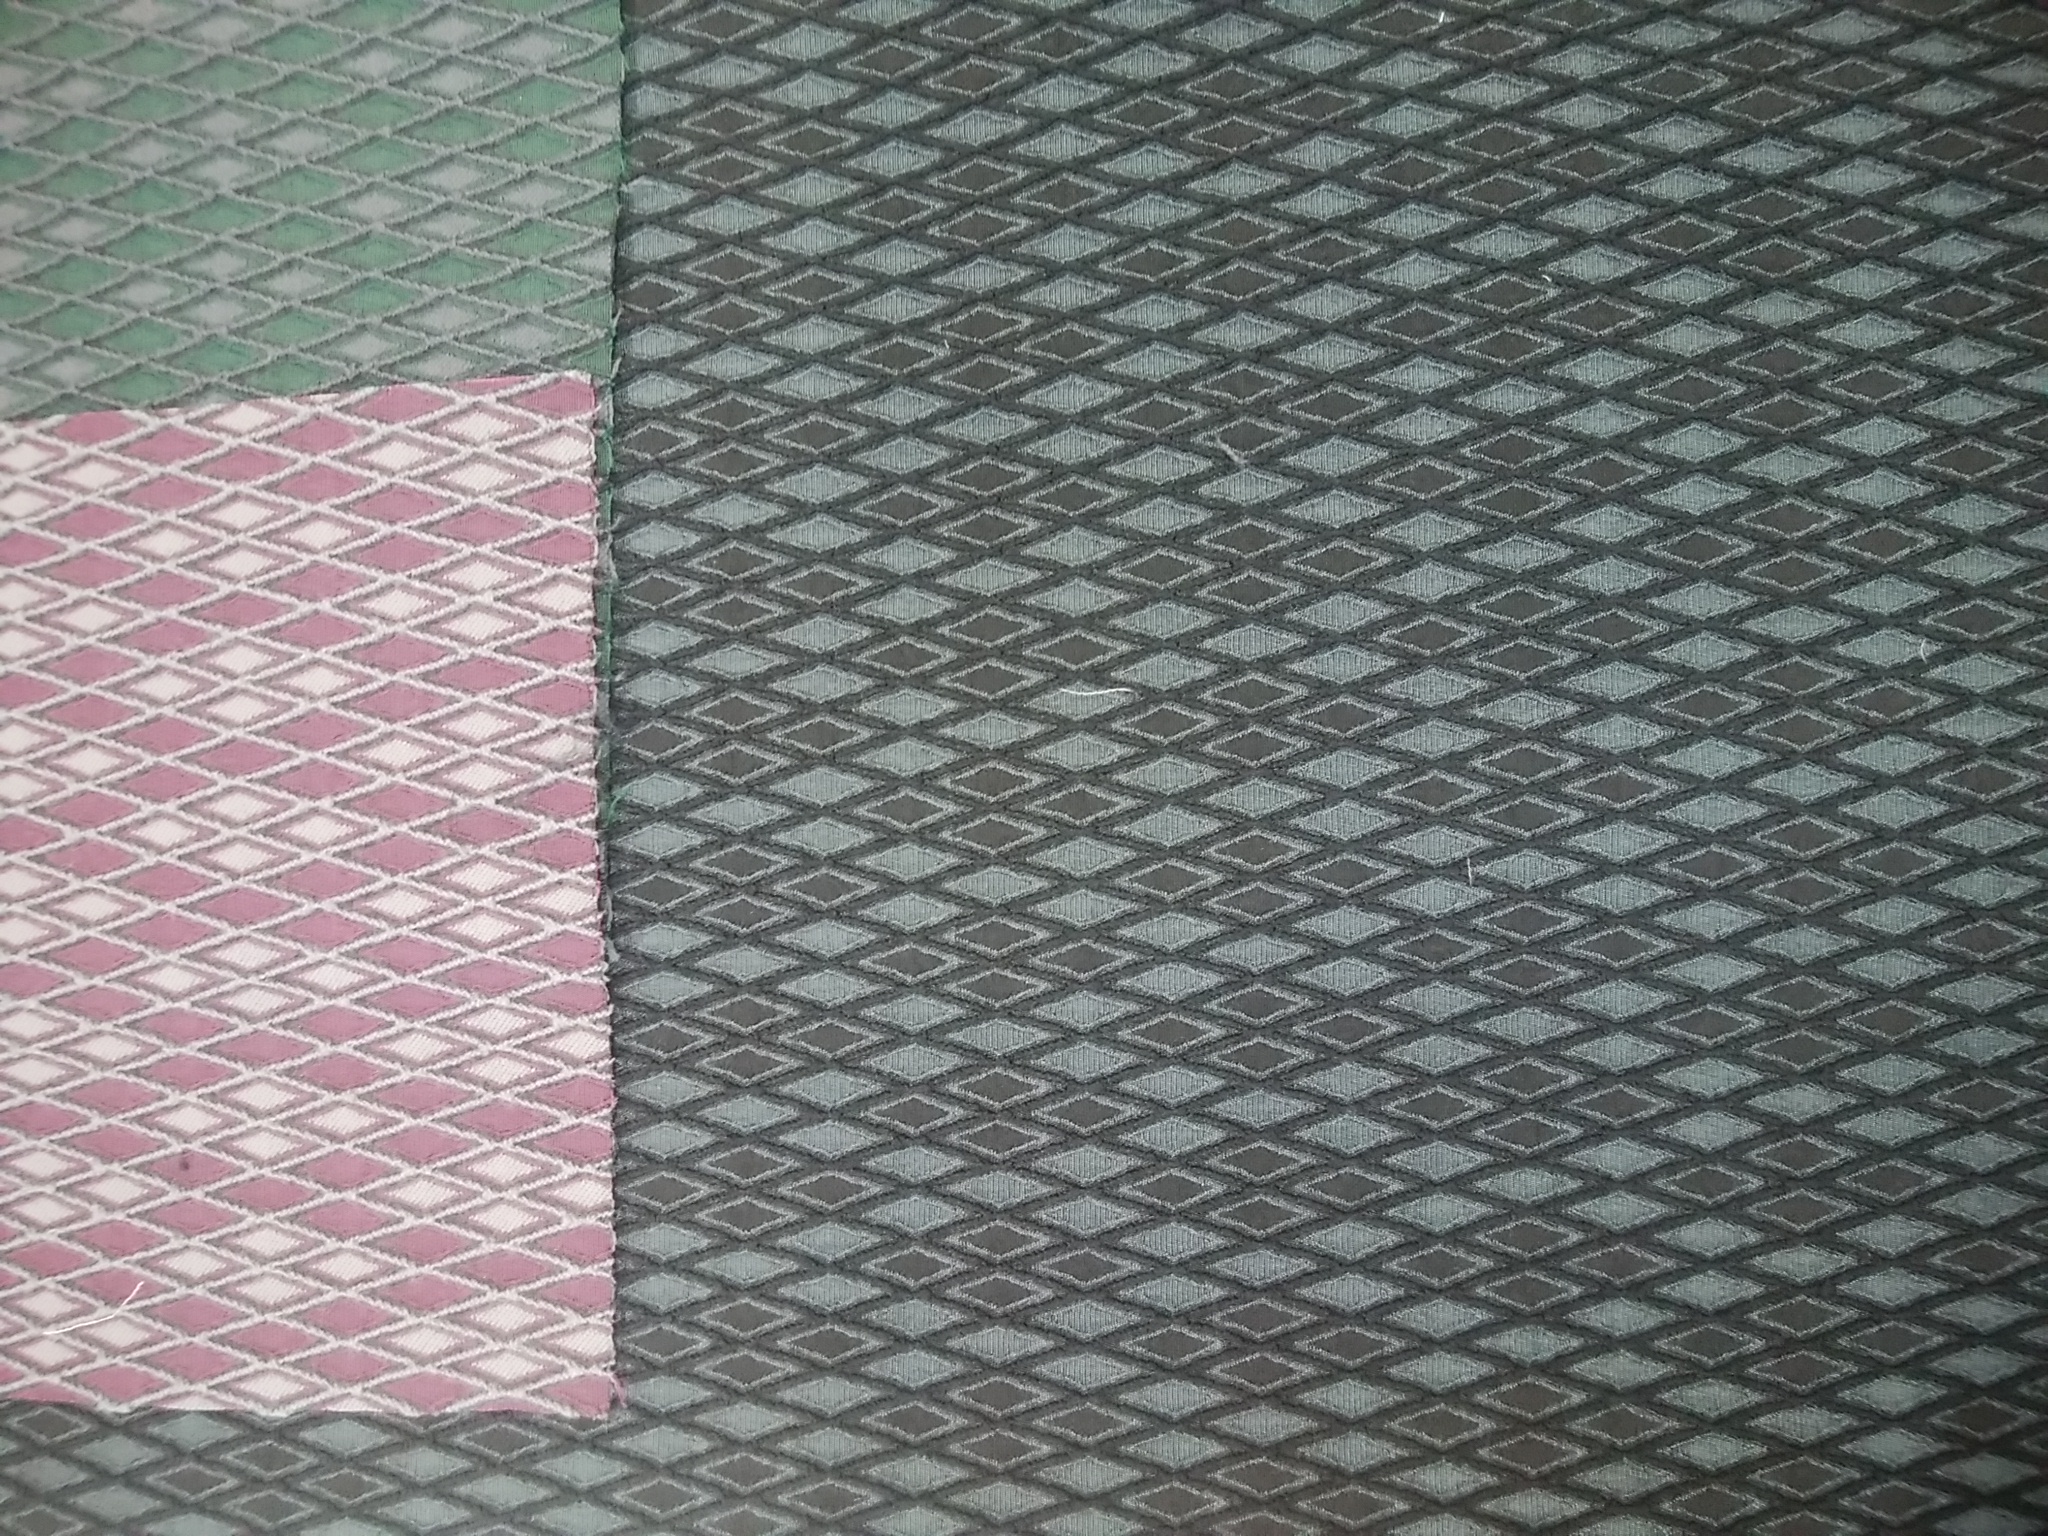 Photograph of the cloth